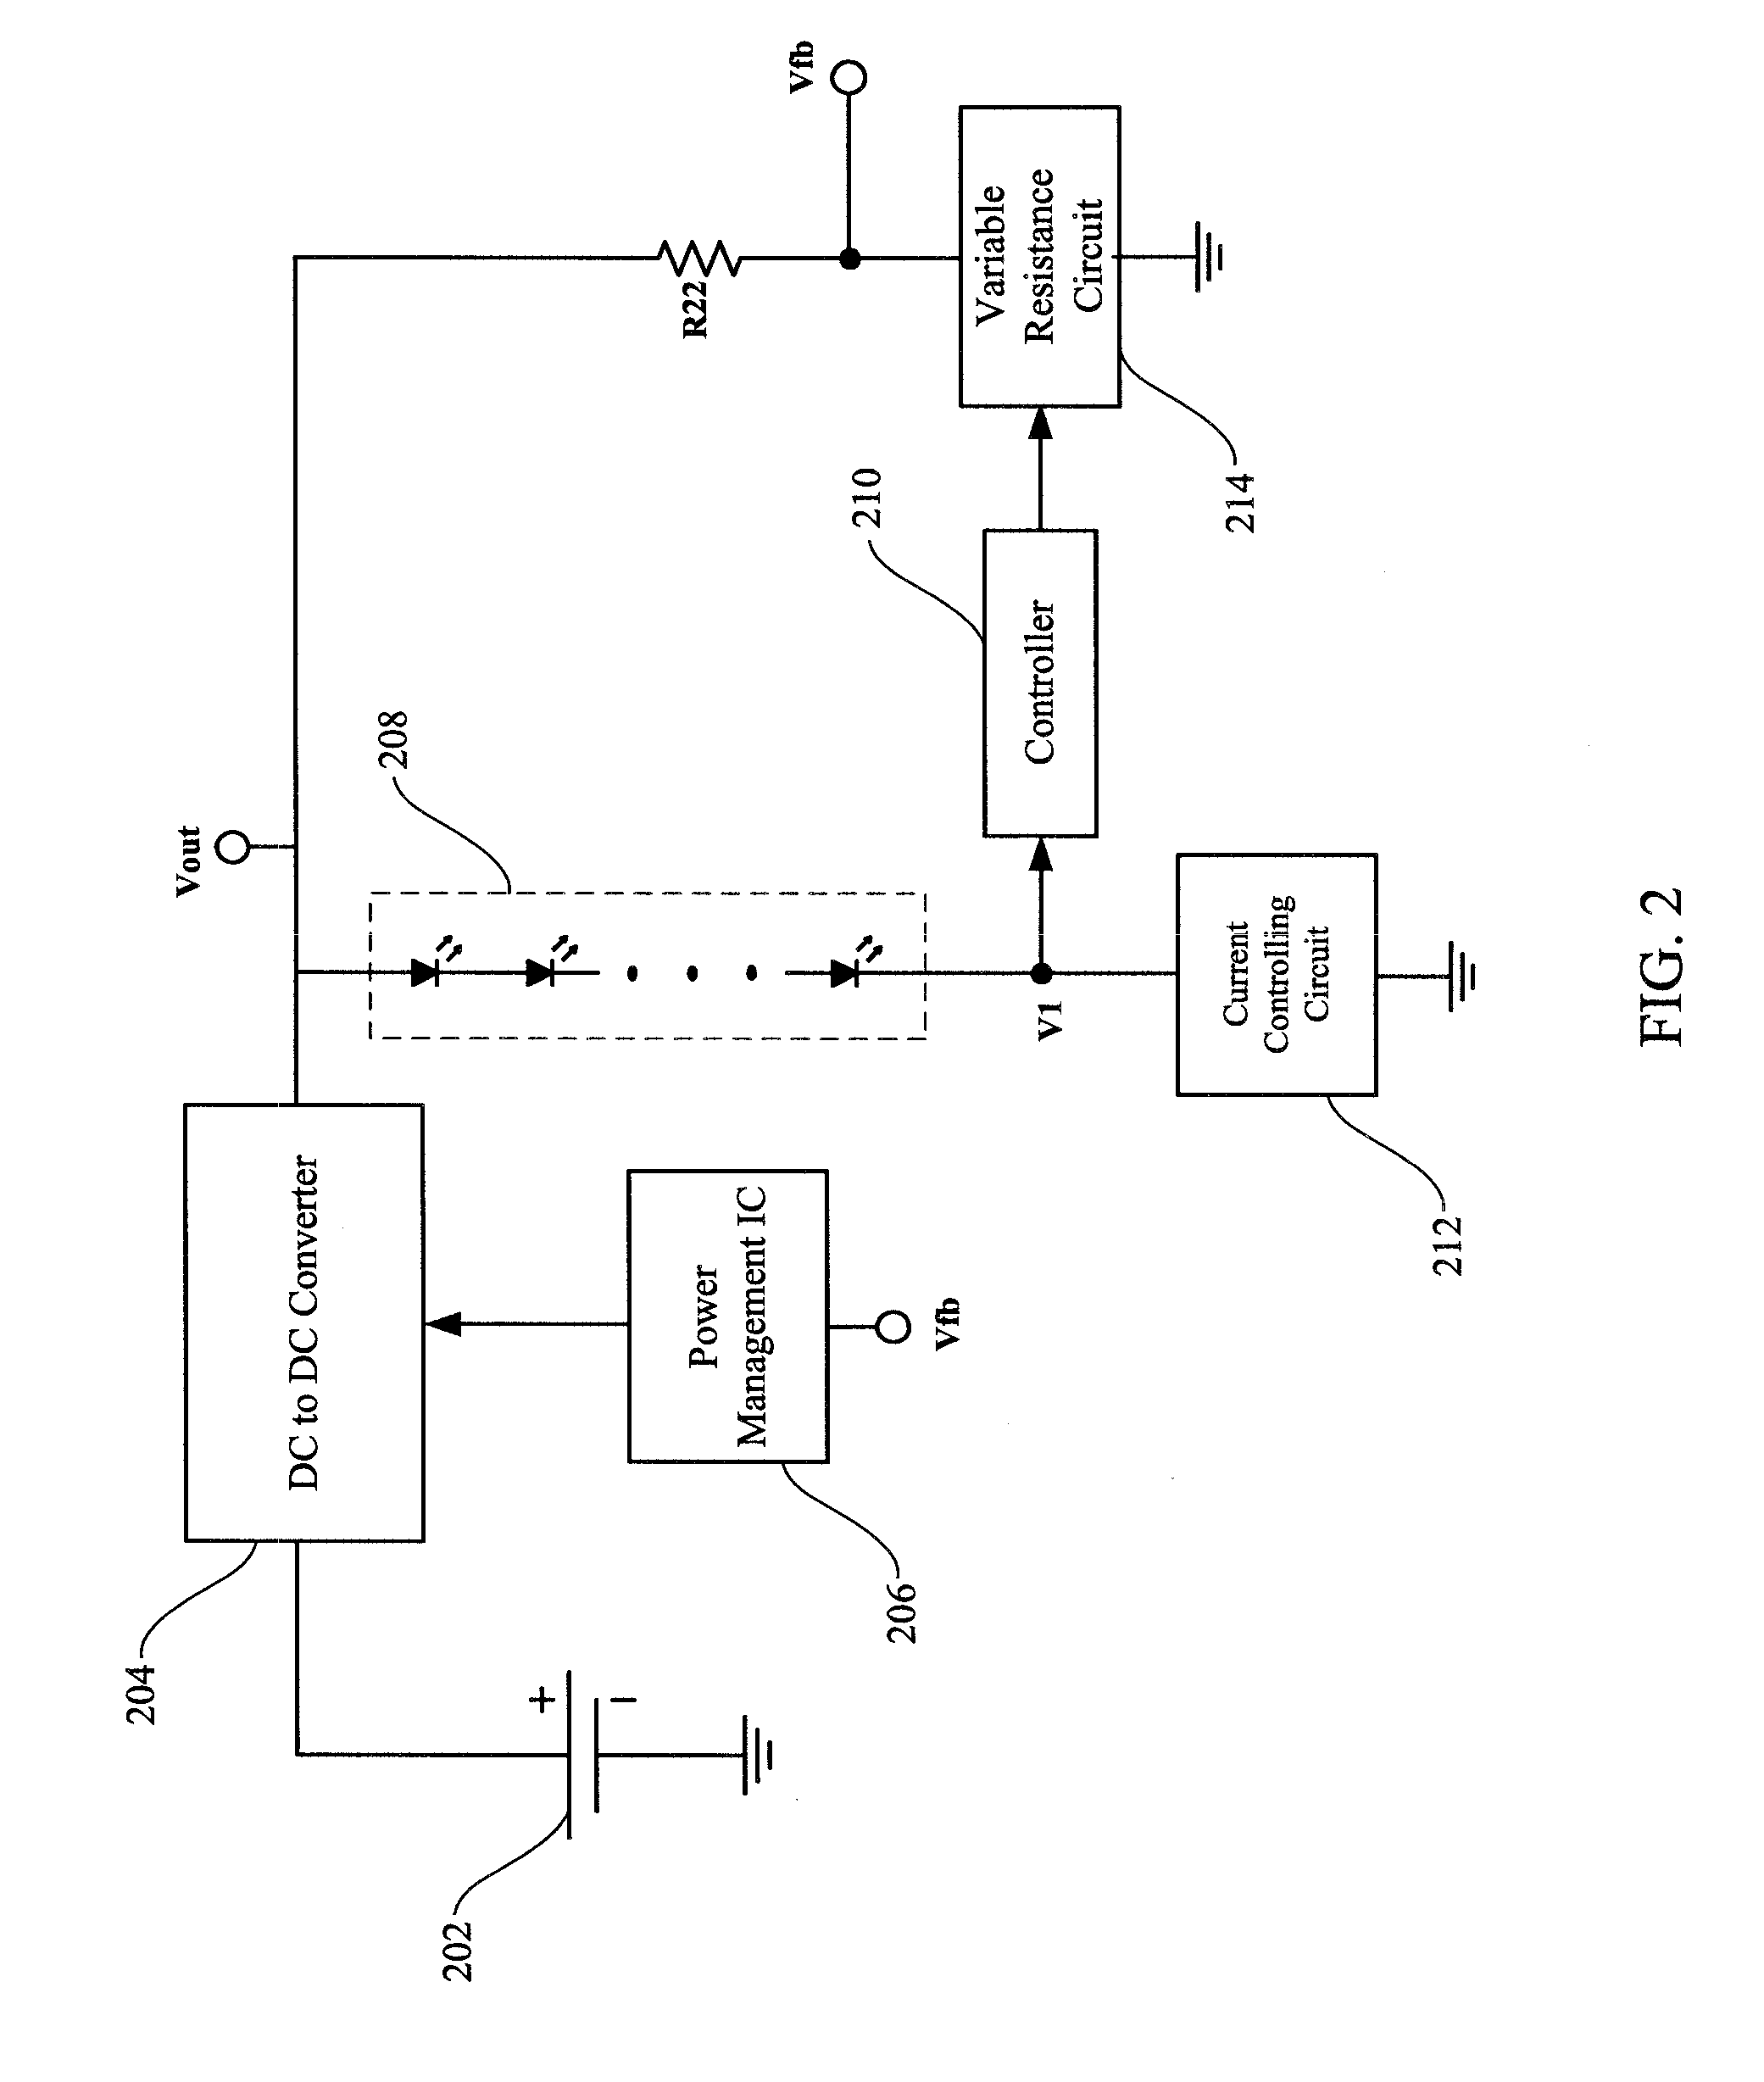 DC to DC conversion circuit with variable output voltage